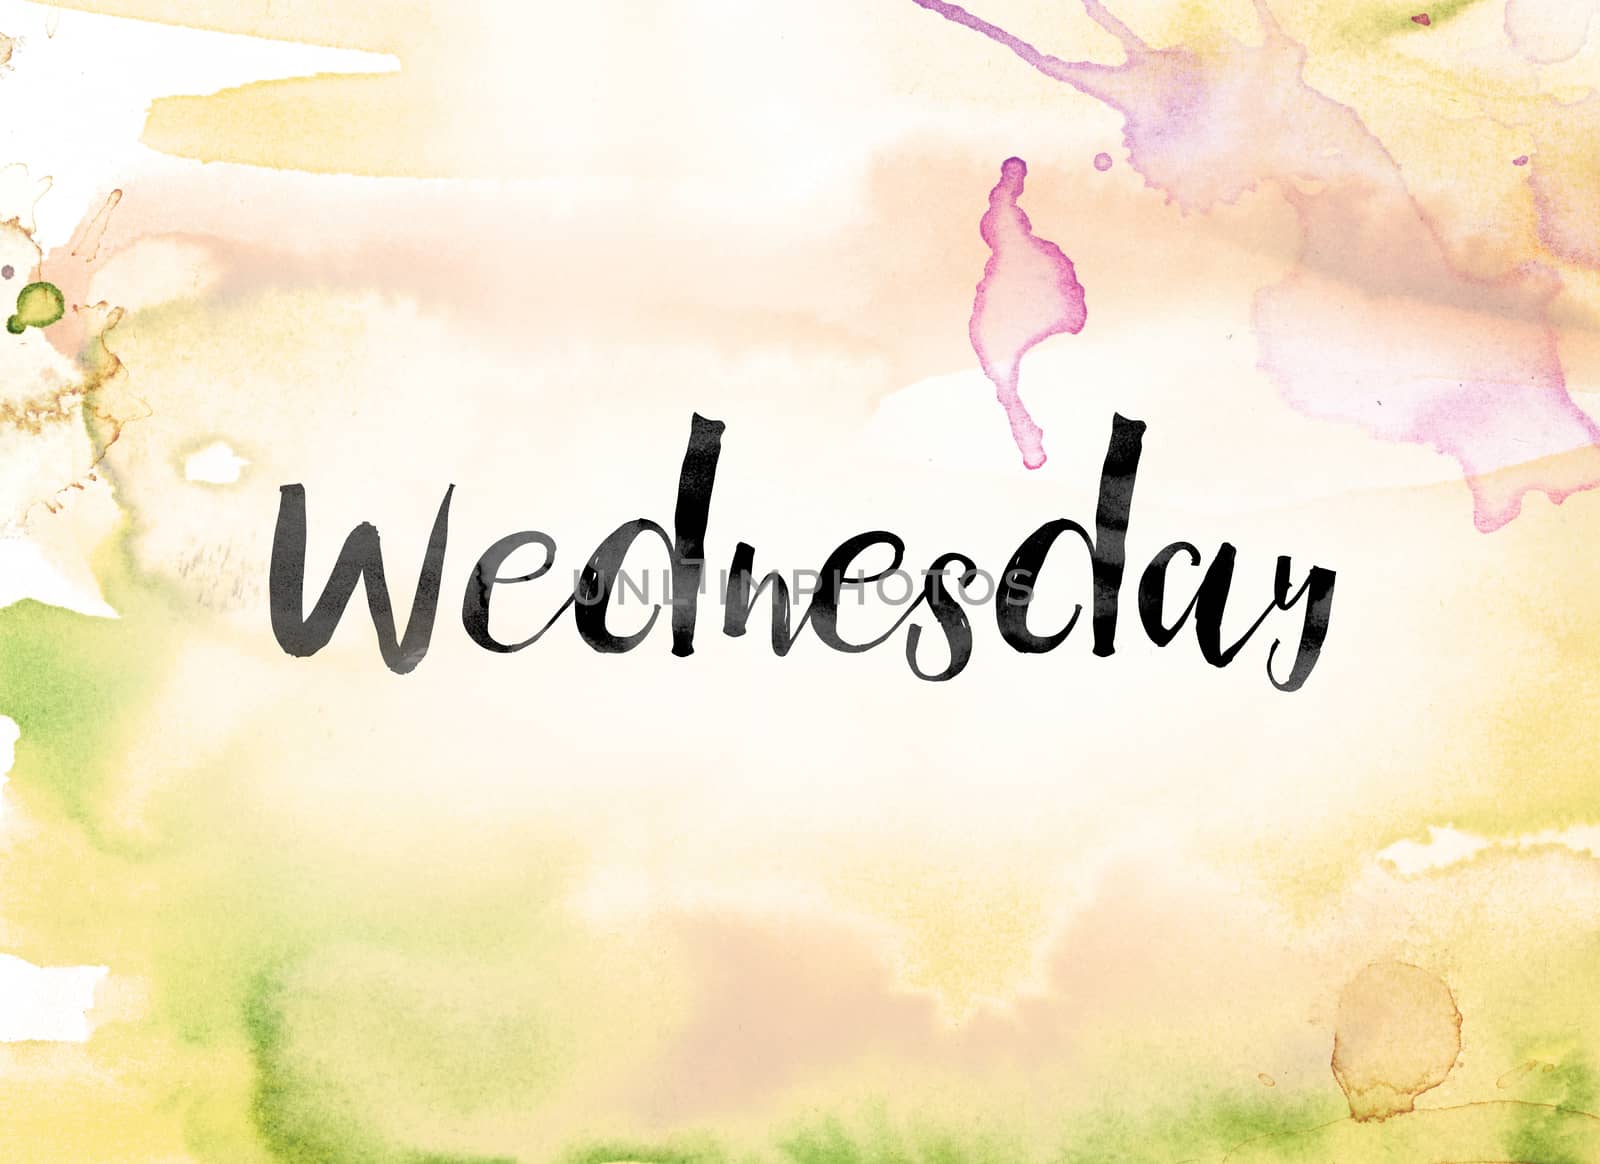 The word "Wednesday" painted in black ink over a colorful watercolor washed background concept and theme.